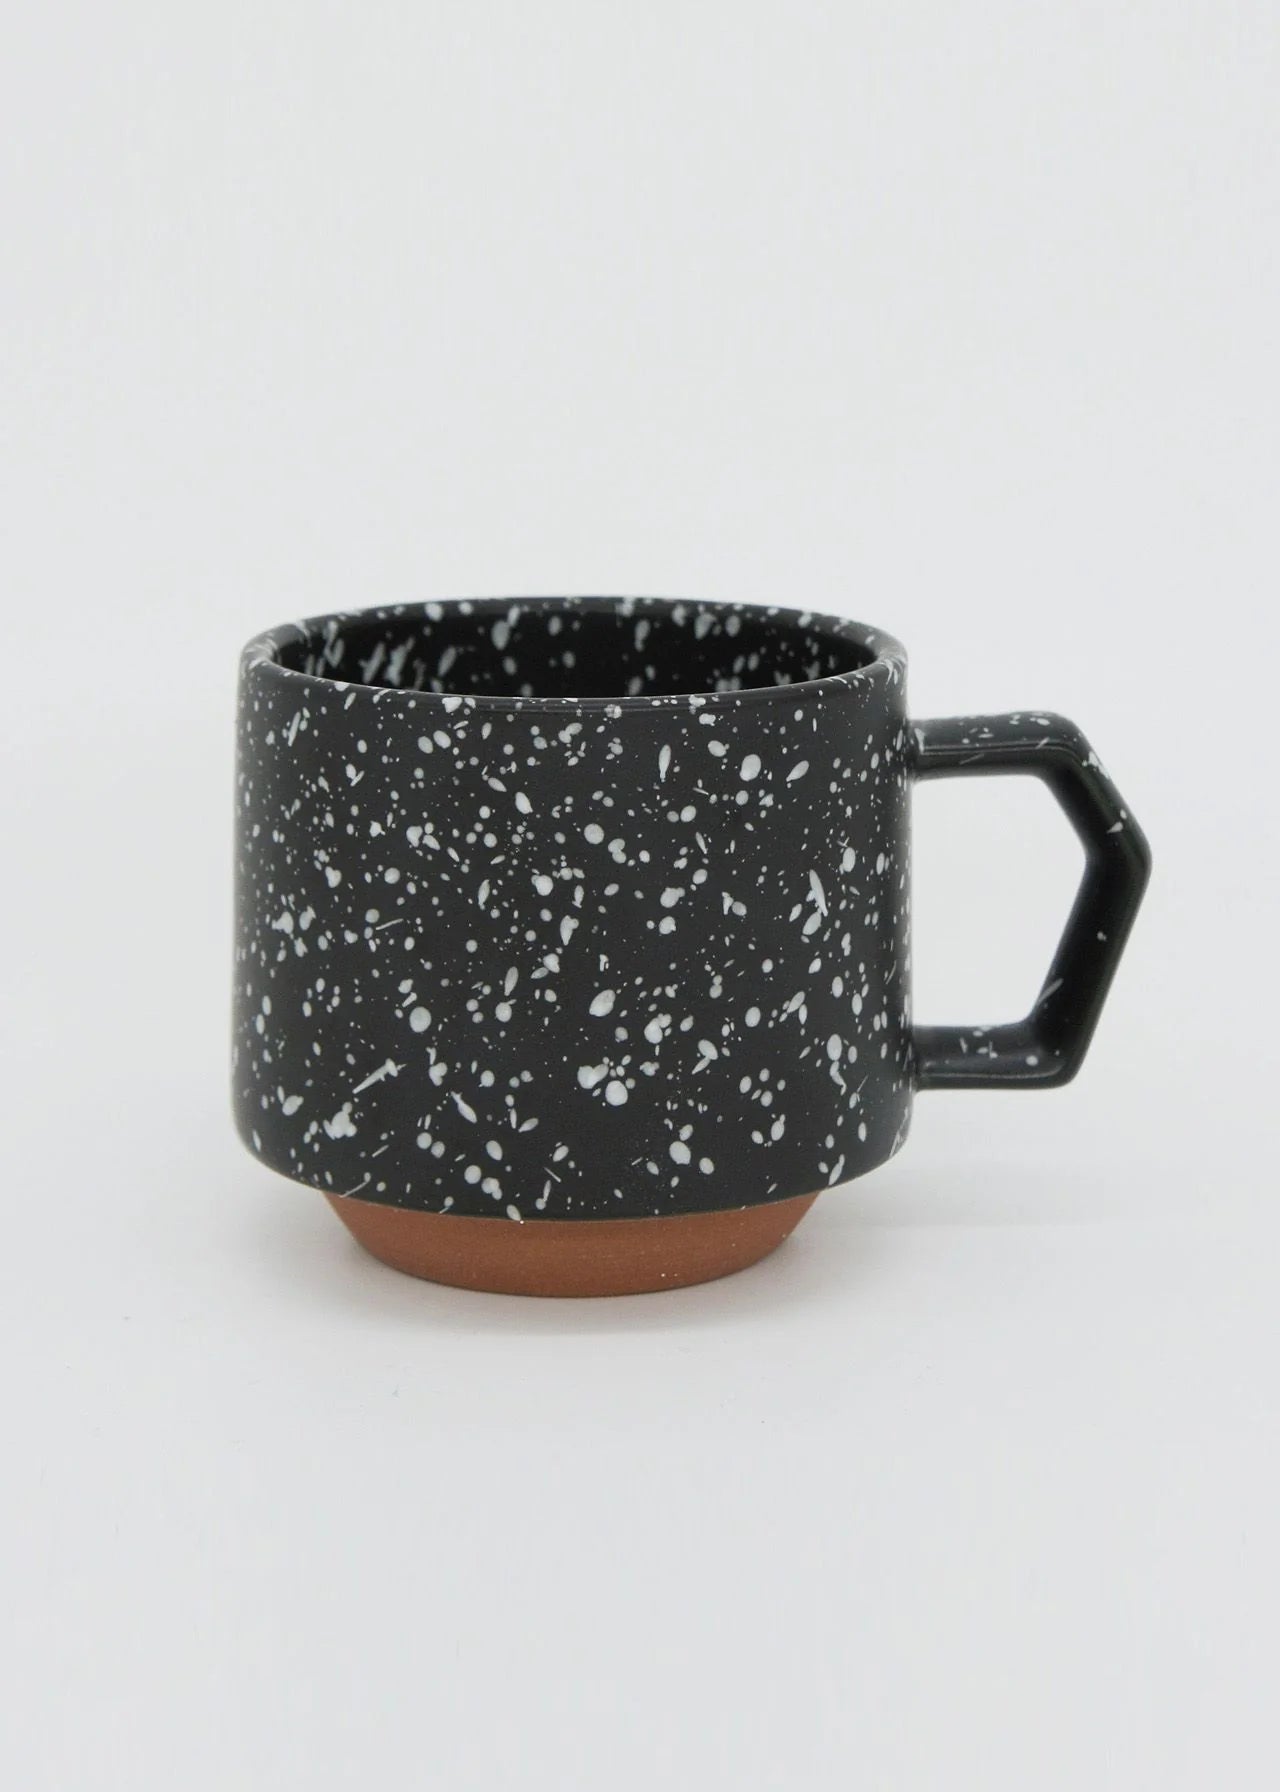 A CHIPS Inc. Stacking Mug – Speckled Black with white speckles on it.